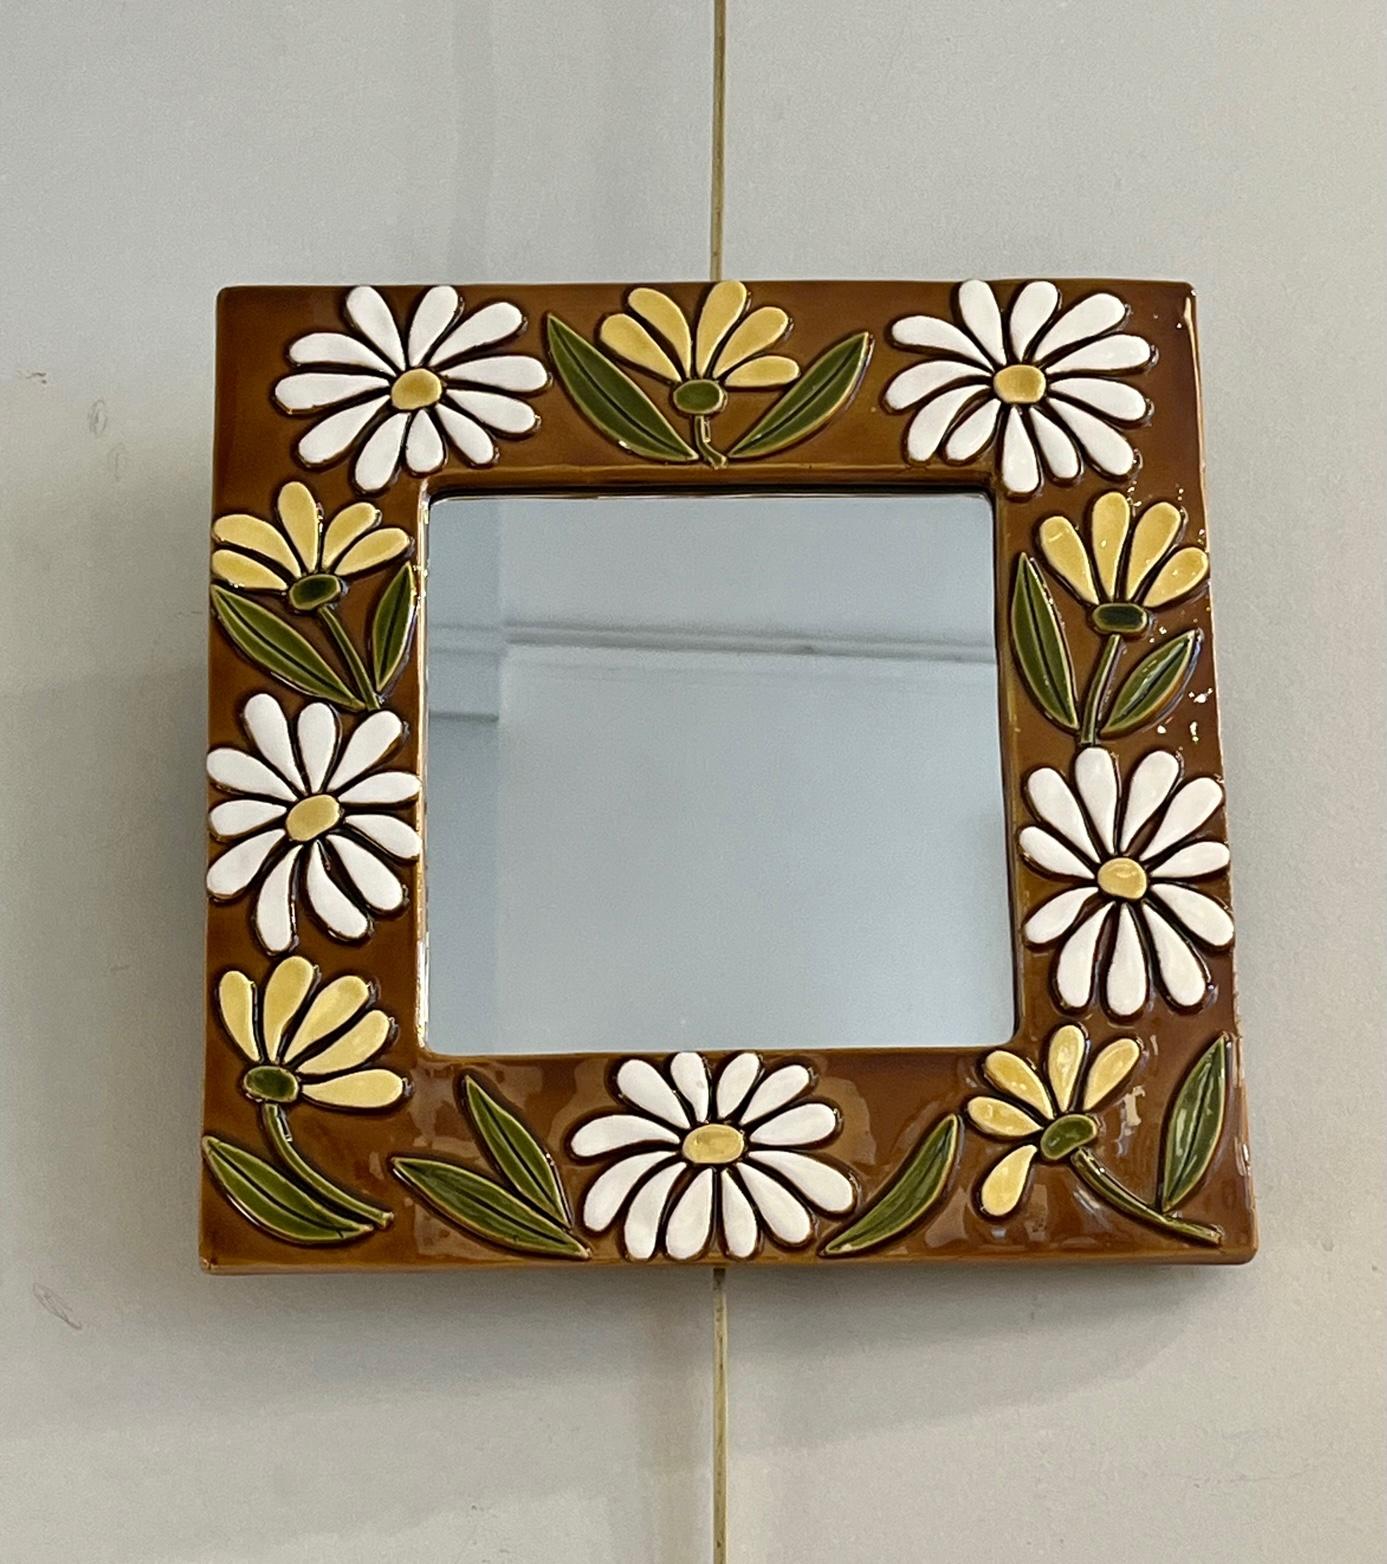 Square ceramic mirror by Mithé Espelt 
The  broad glazed ceramic frame is decorated with white and yellow daisies and foliage on a light brow background. 
This type of design is rarely seen in Mithé Espelt's work although flowers were one of the